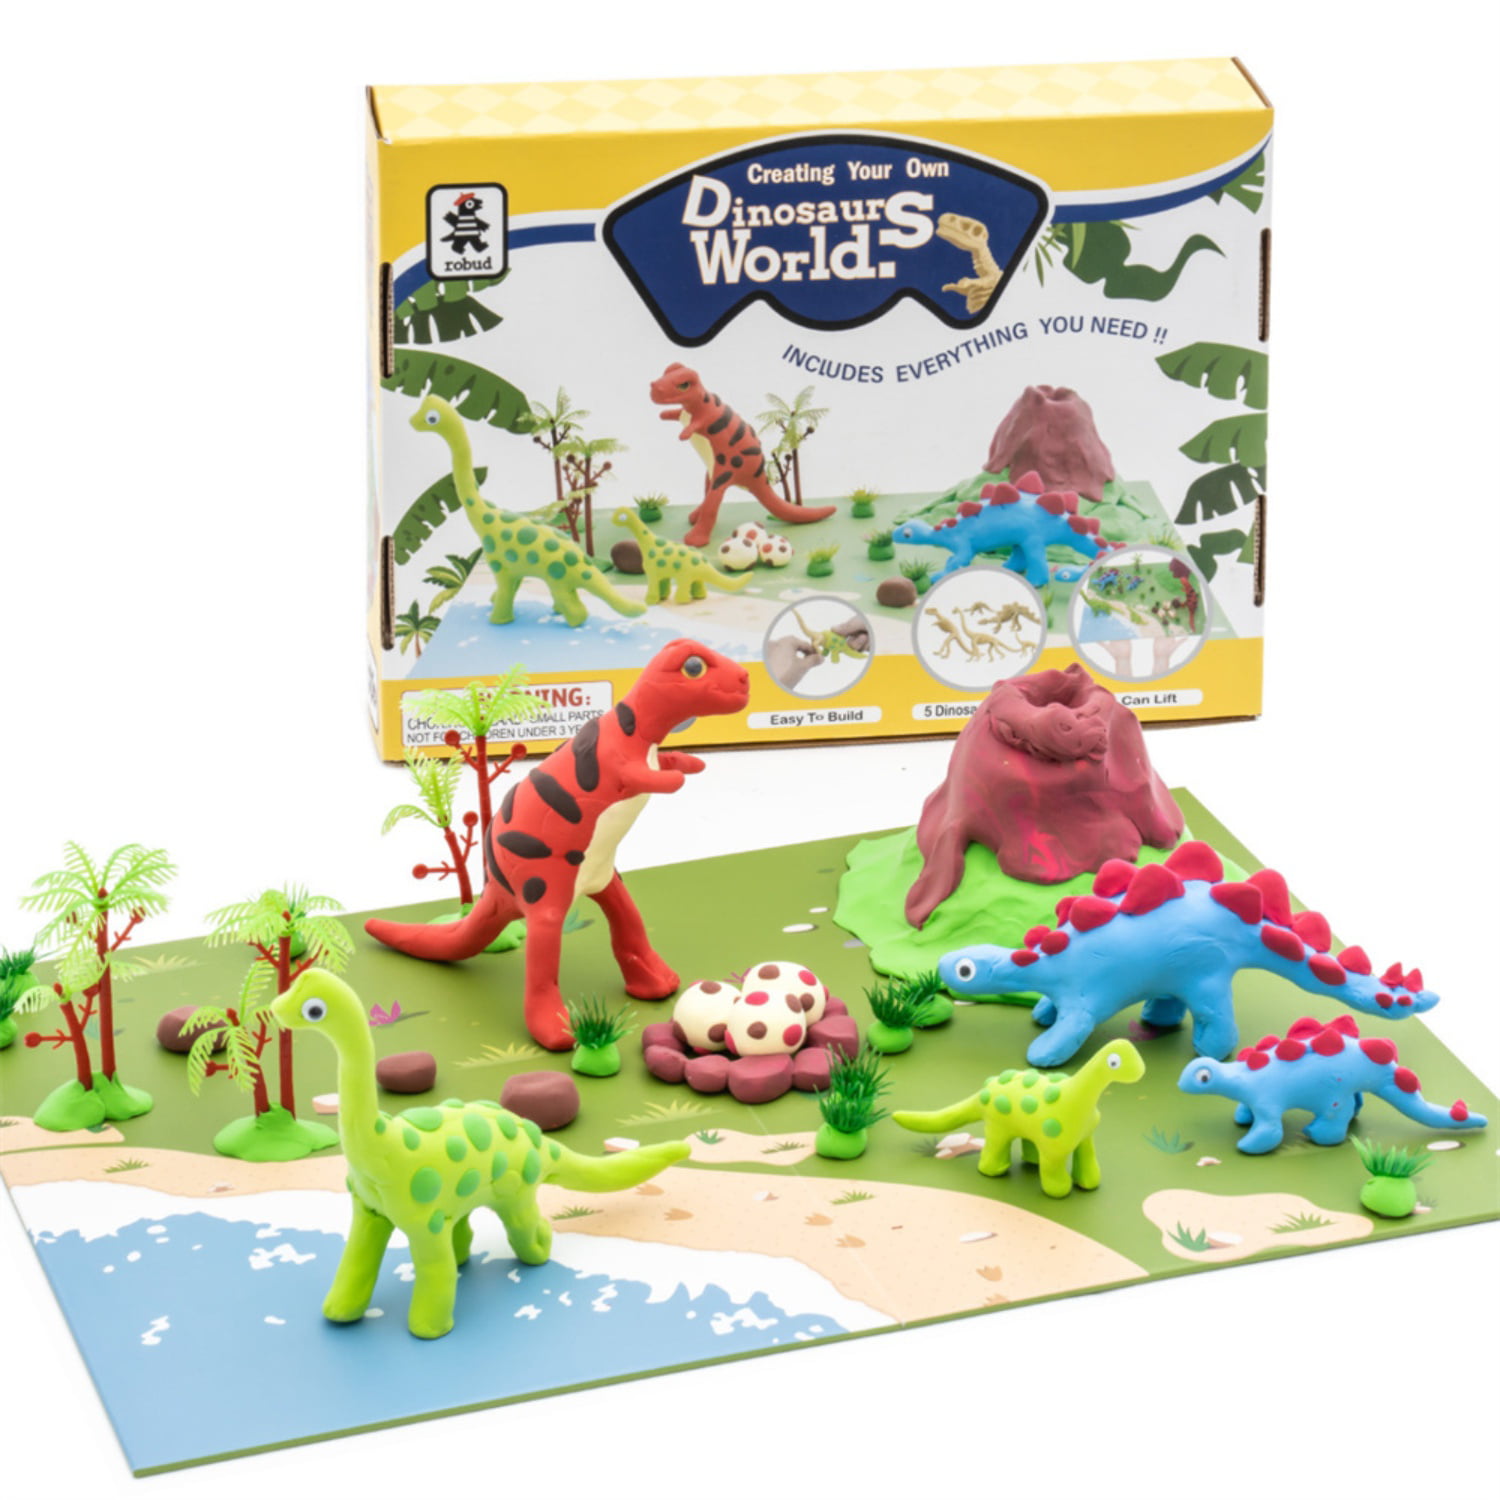 Robotime Kids Modeling Clay Dinosaur Craft Kit | Builds Dinos Crafts -  Ultra Light Air Dry Clay for Kids, Boys & Girls